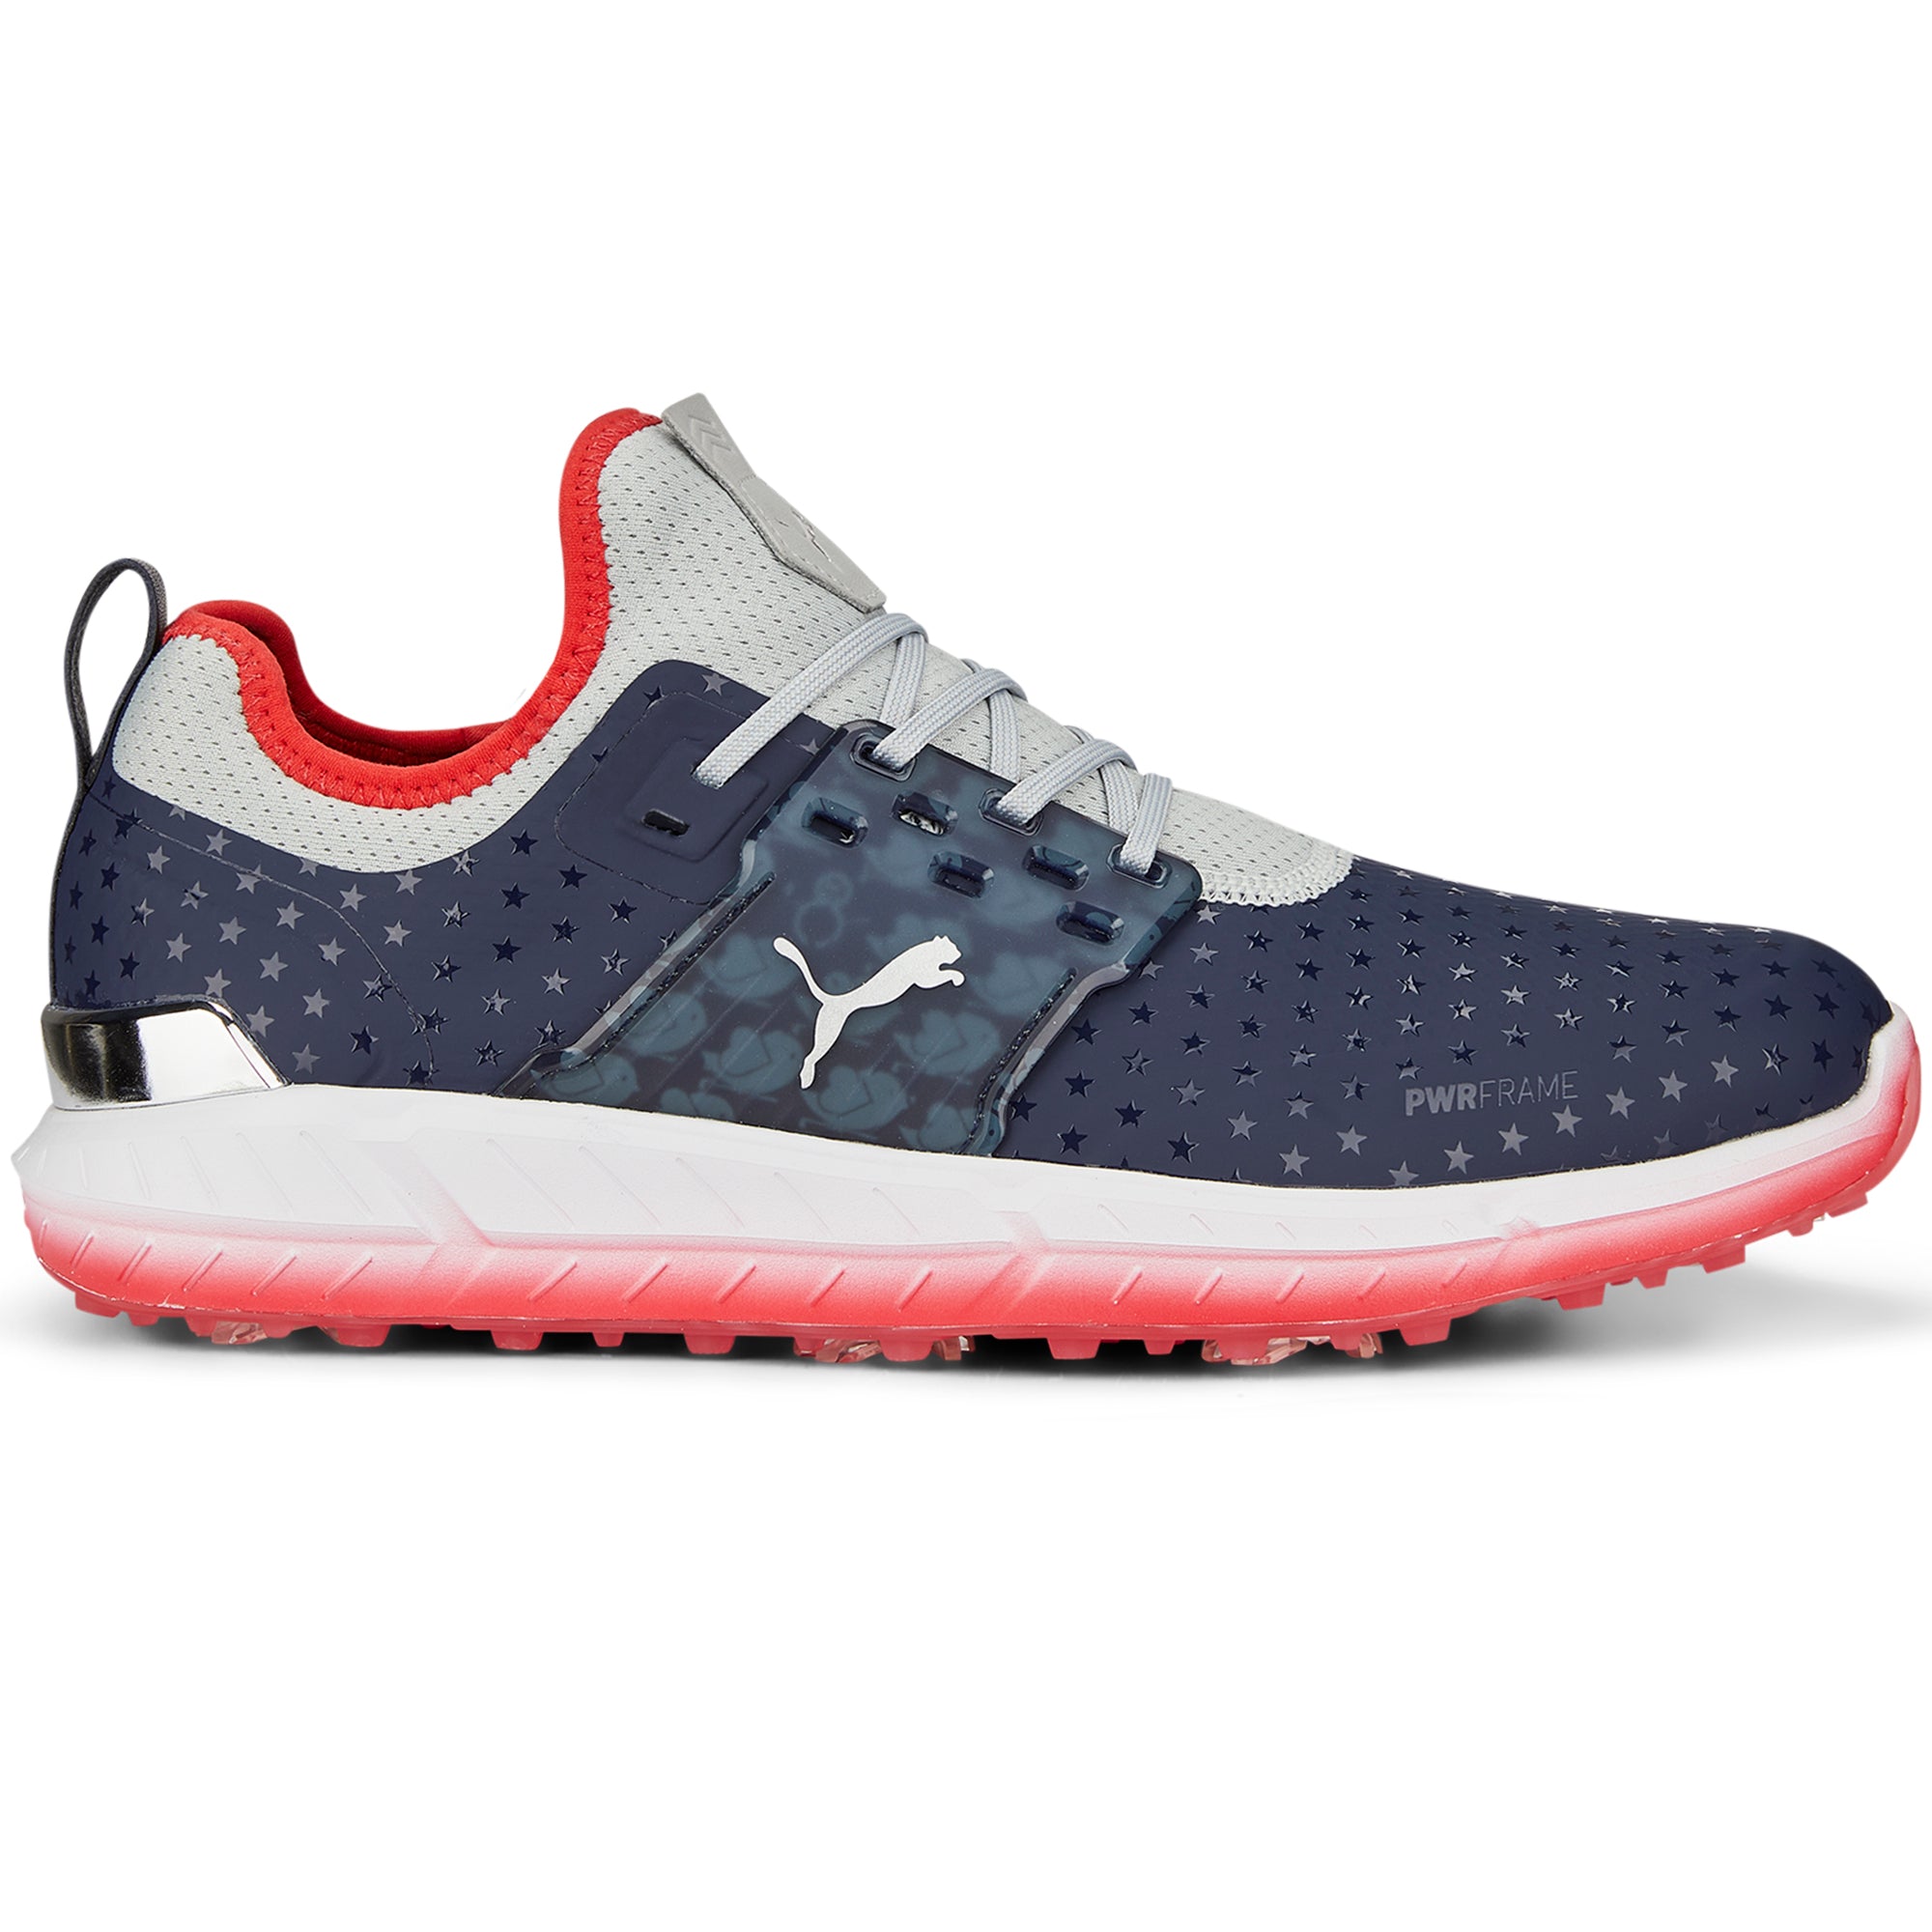 puma-ignite-articulate-stars-stripes-le-golf-shoes-378336-puma-navy-for-all-time-red-01